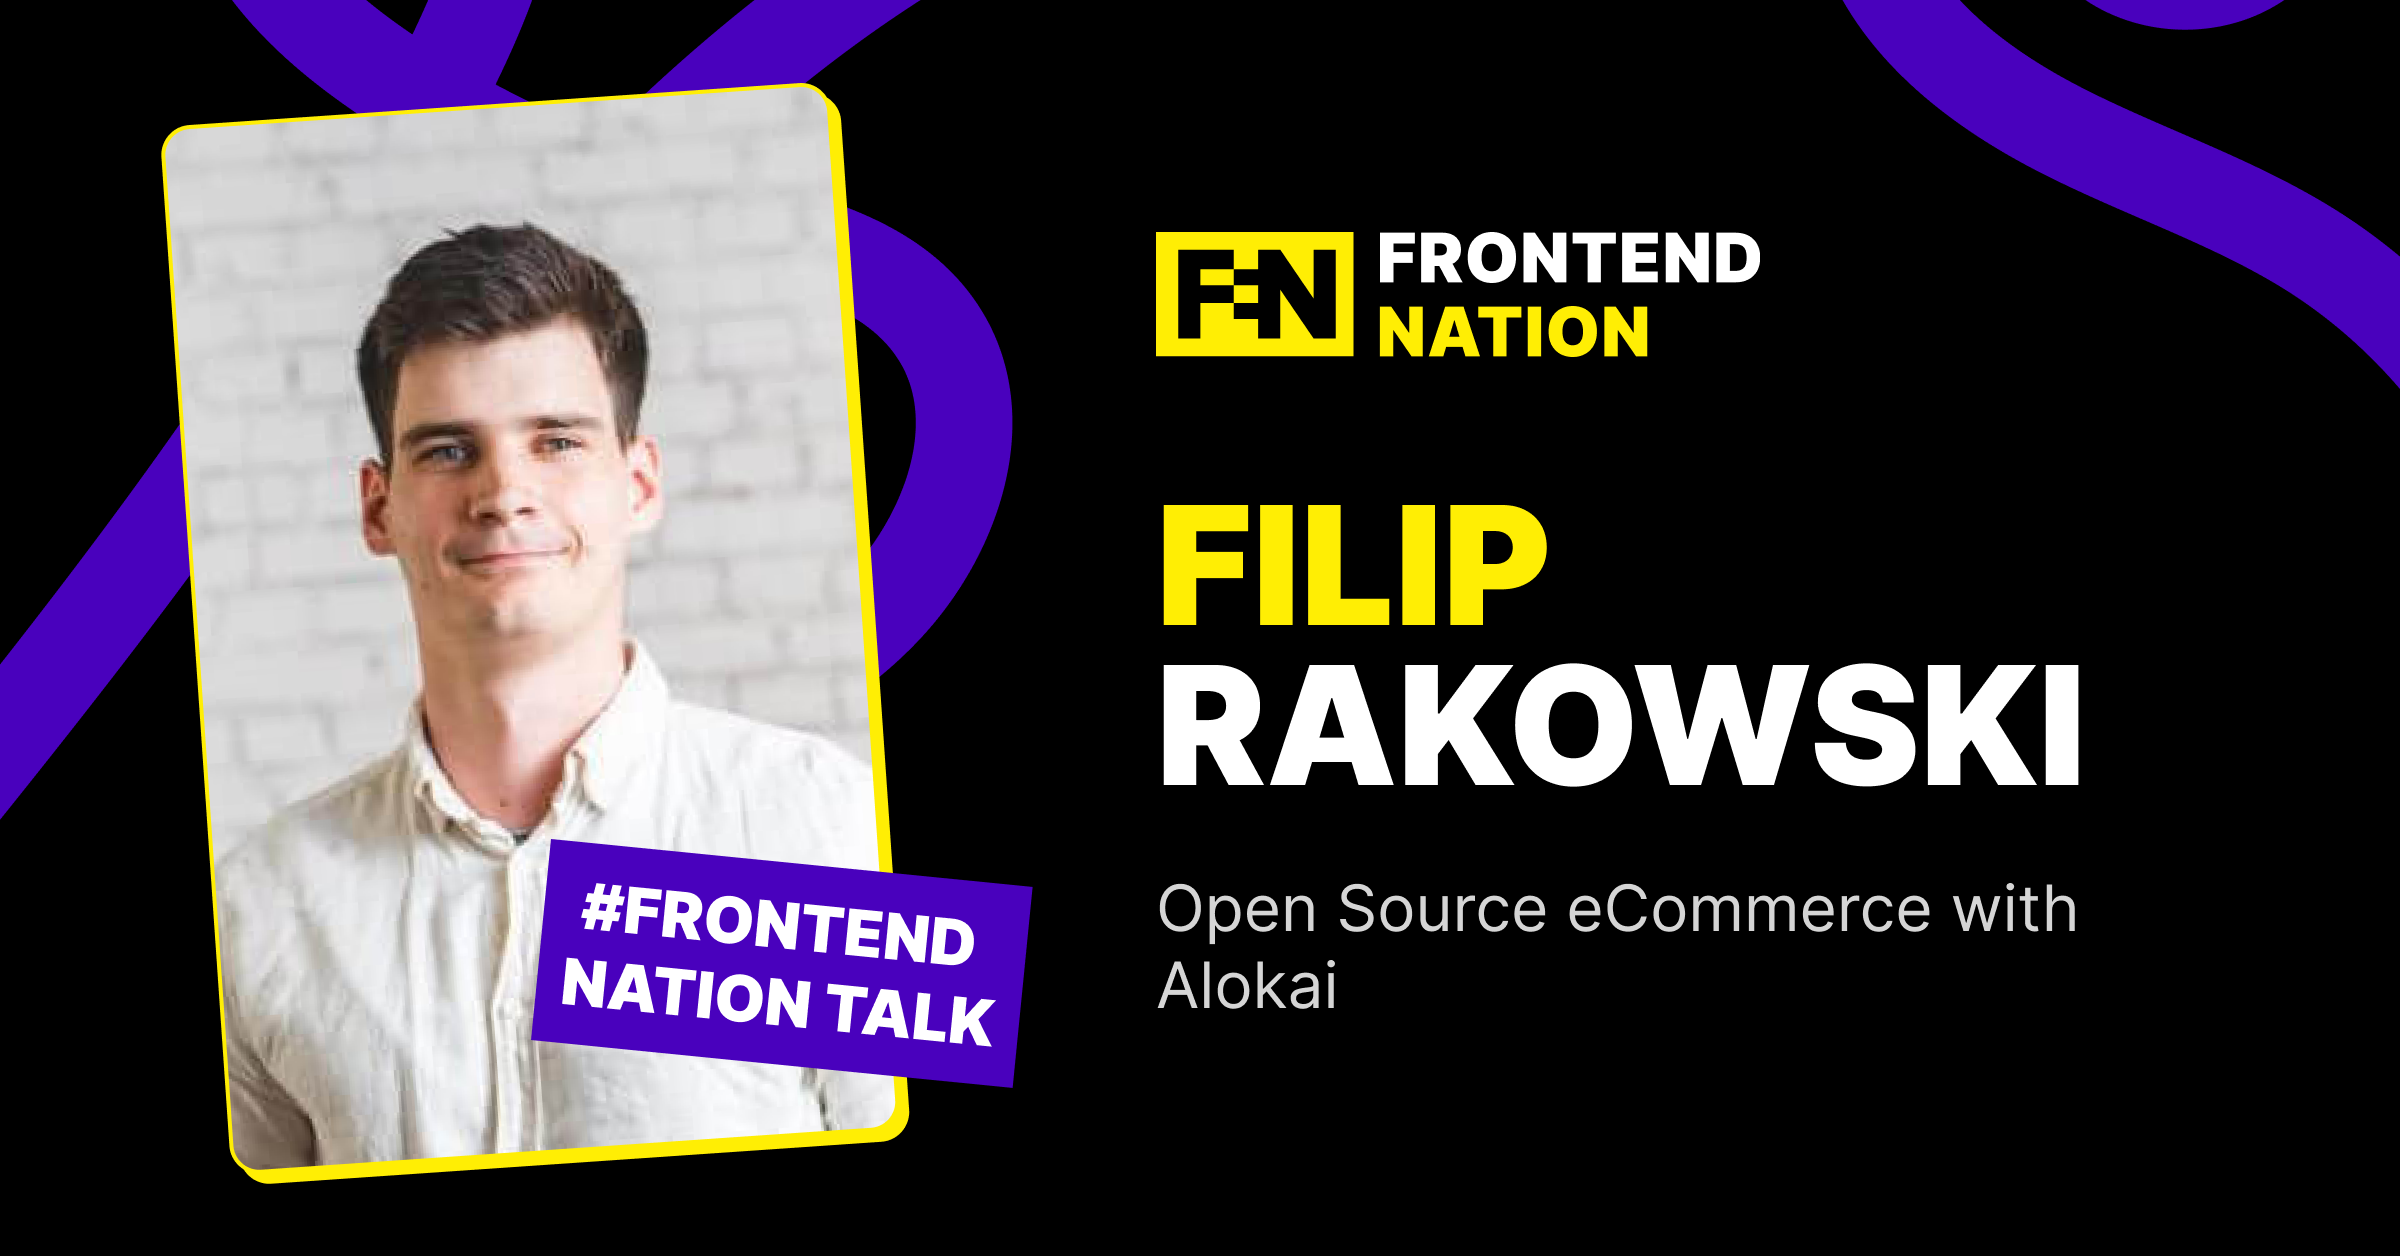 Open Source E-commerce on the Cutting Edge: Insights from Filip Rakowski's Frontend Nation Talk